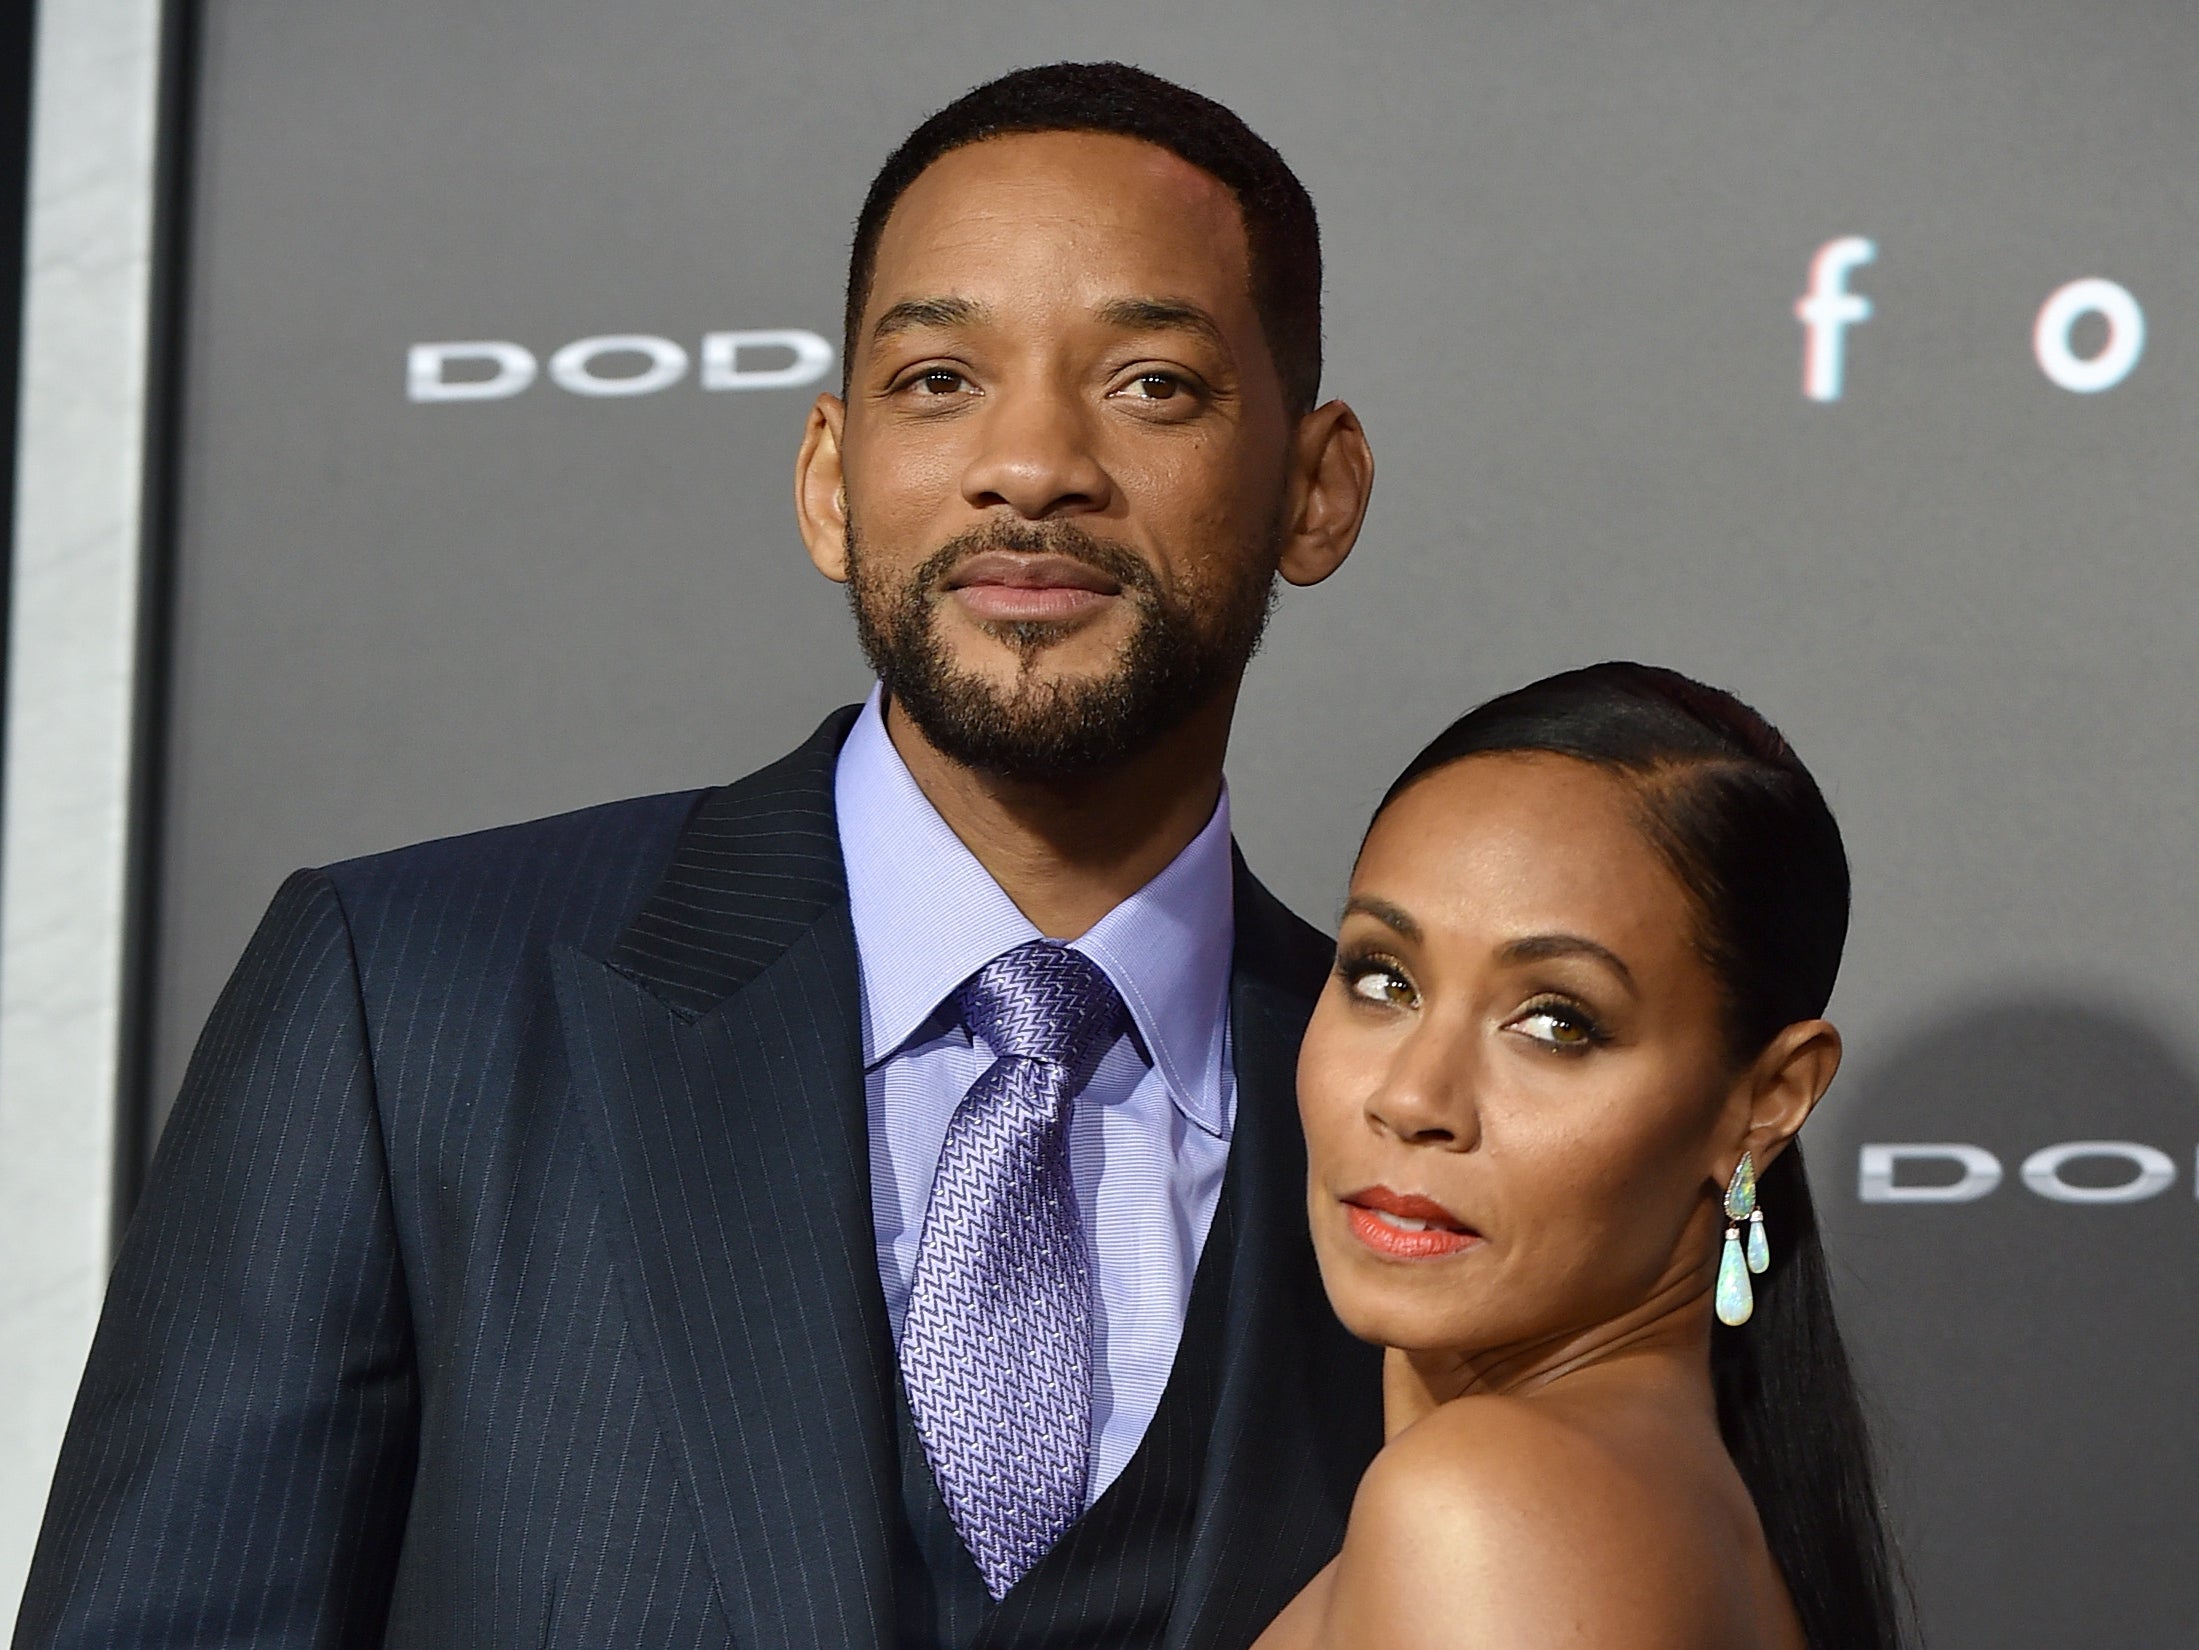 Jada Pinkett Smith Finally Spoke Out About the Incident at the